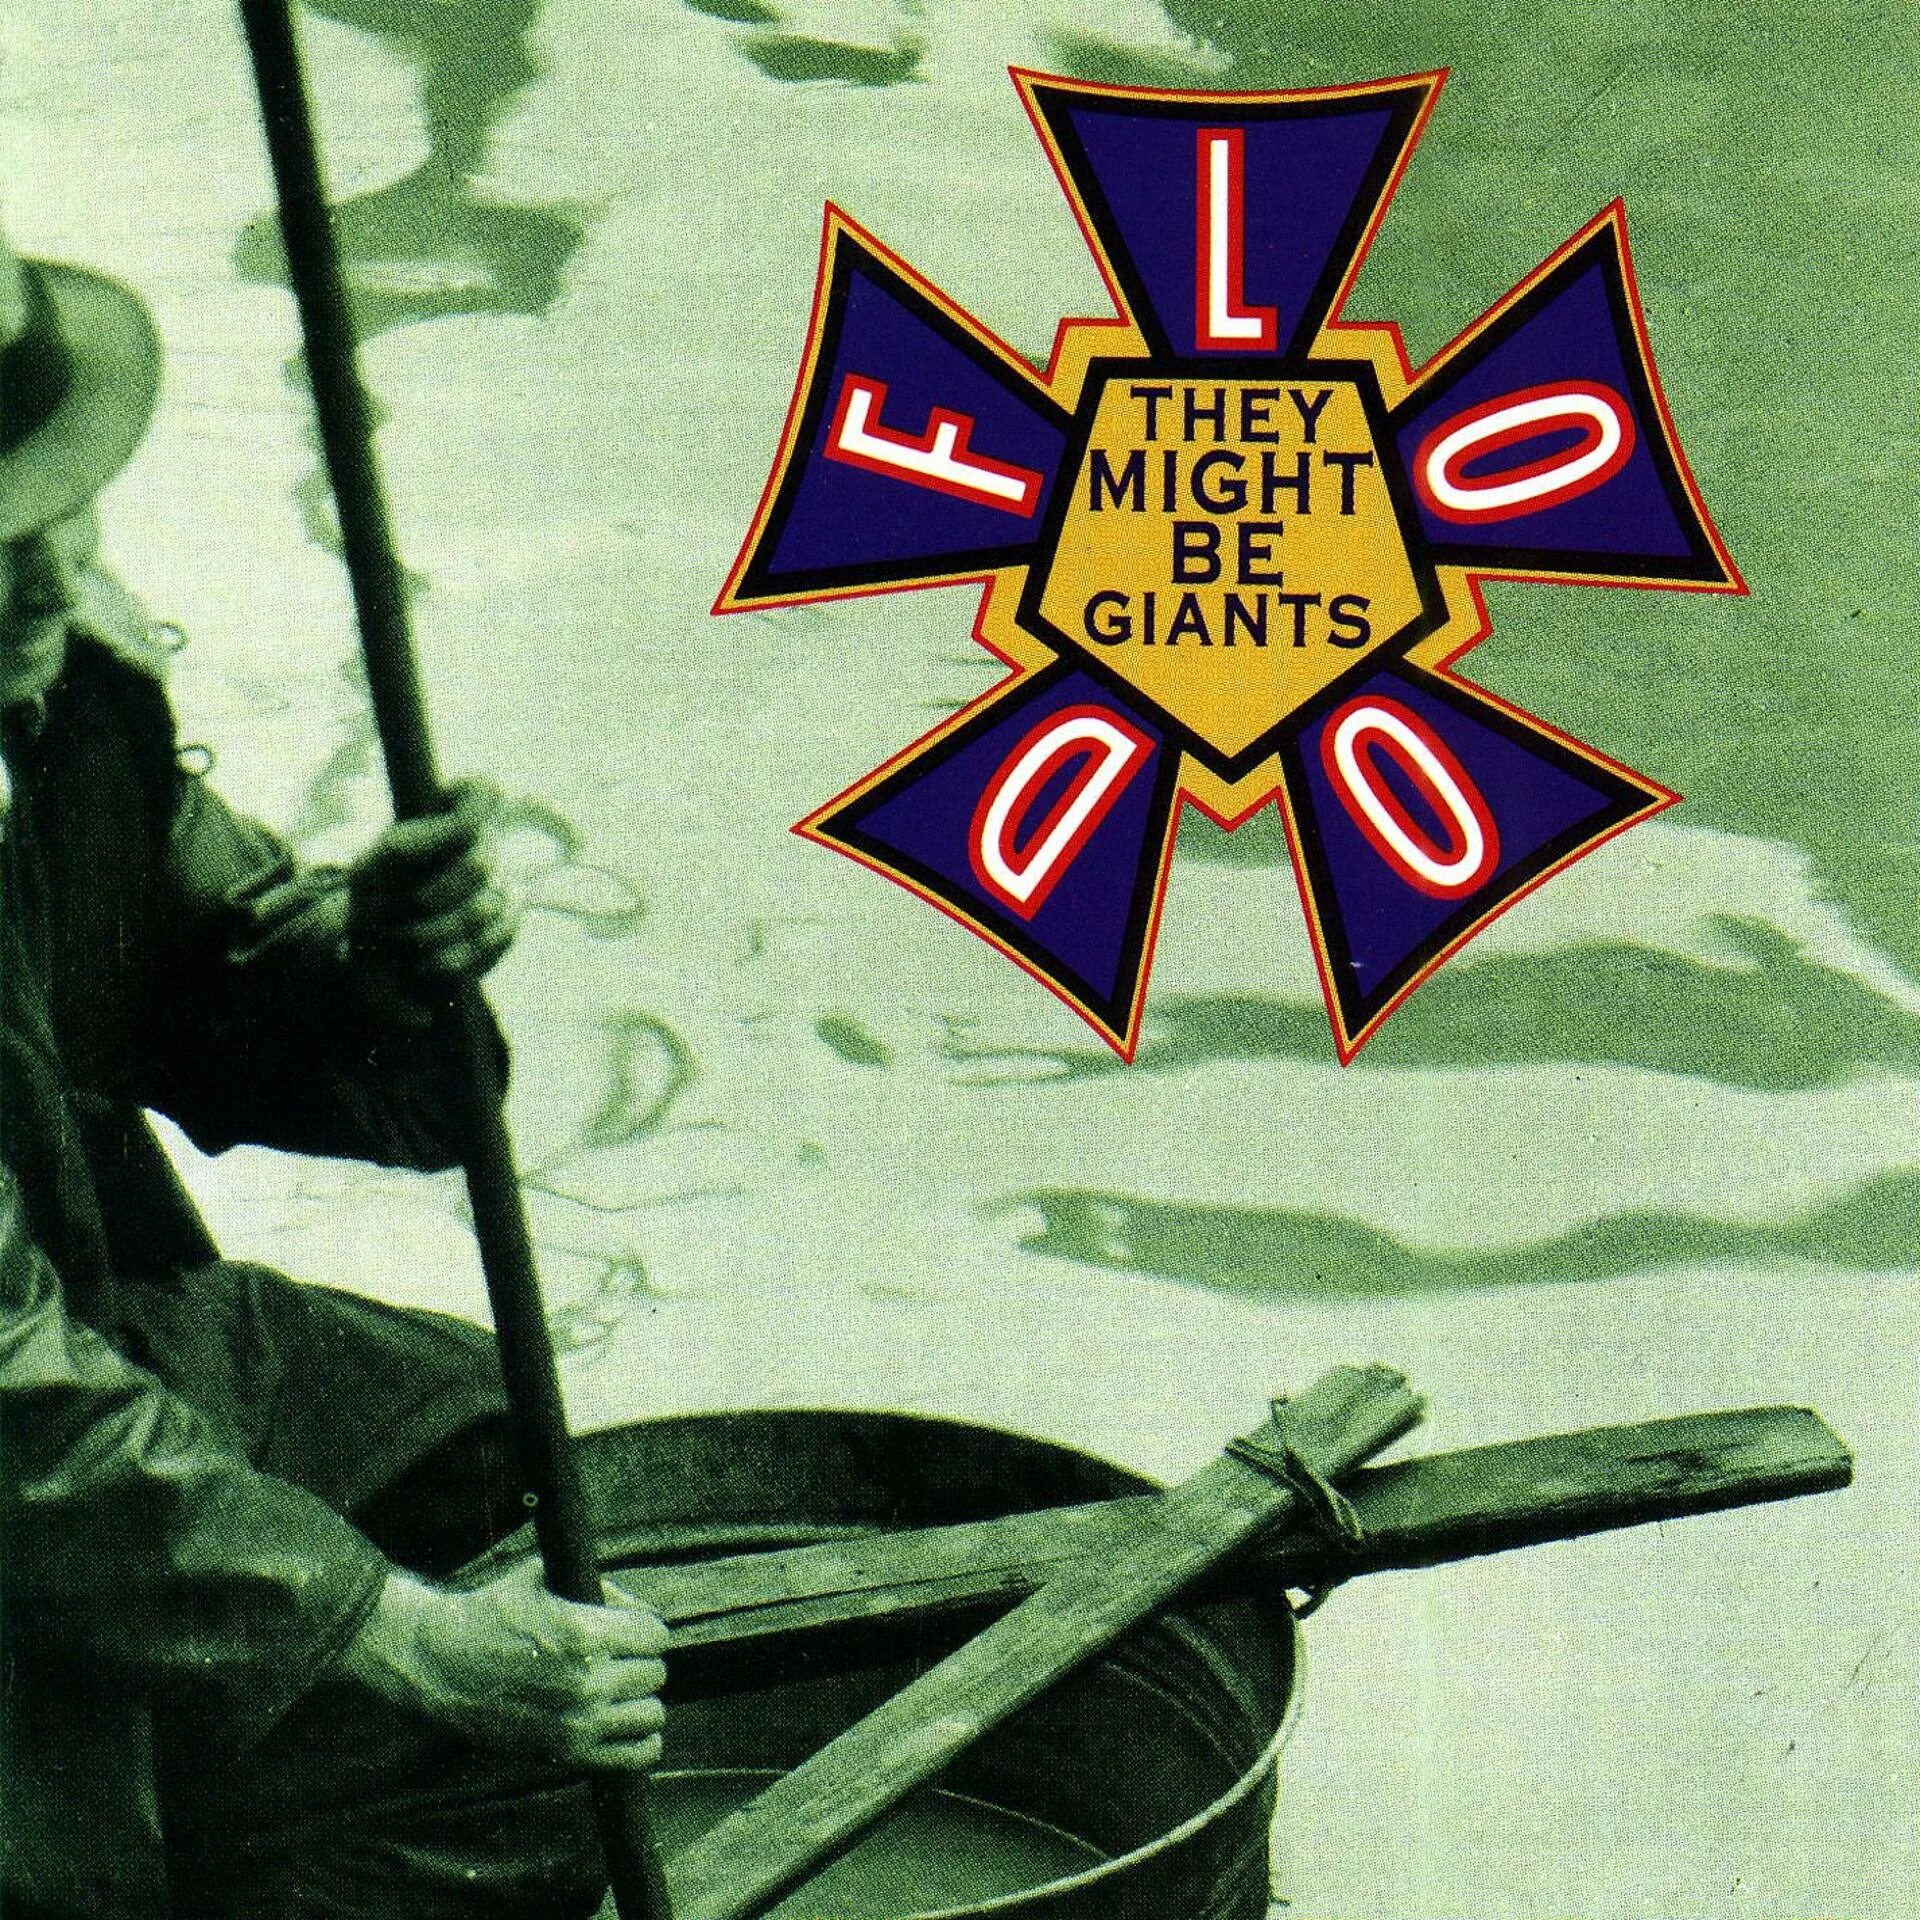 They might be giants "Flood". Istanbul they might be giants. Istanbul not Constantinople they might be giants. They might be giants album.